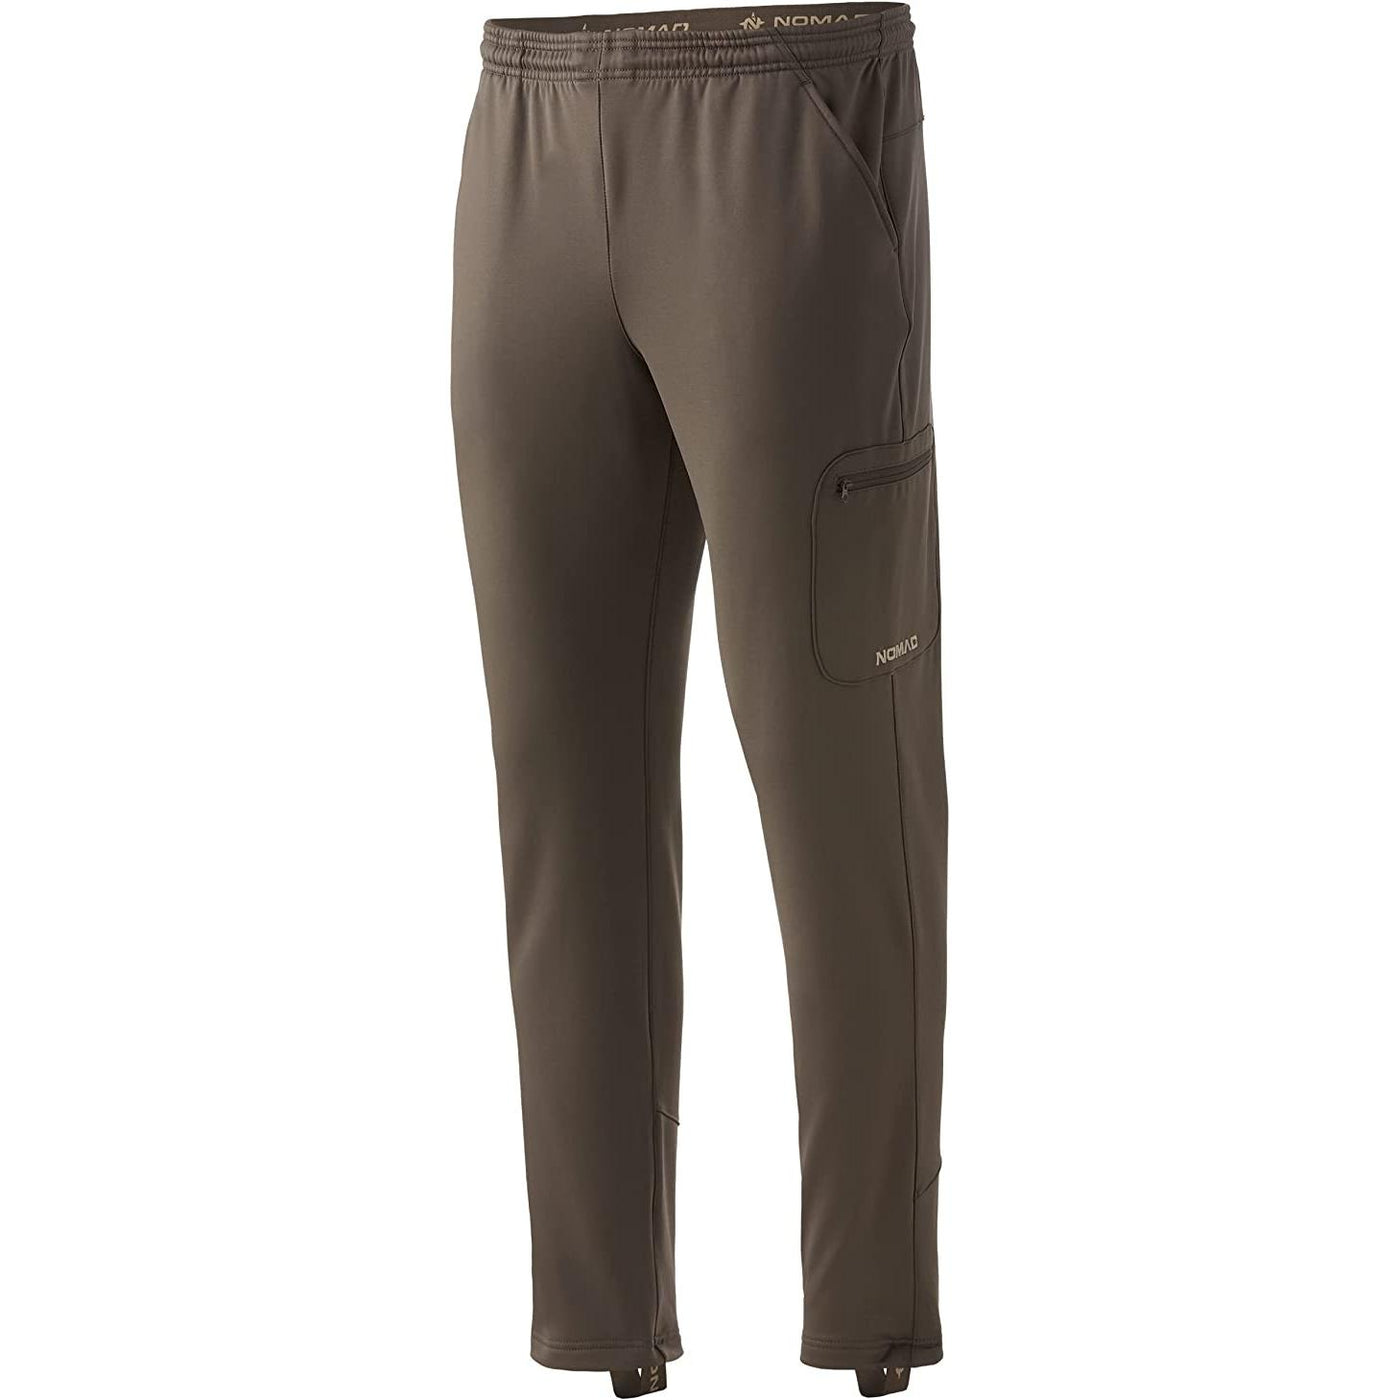 Nomad Utility Wader Pant-Men's Clothing-Mud-S-Kevin's Fine Outdoor Gear & Apparel